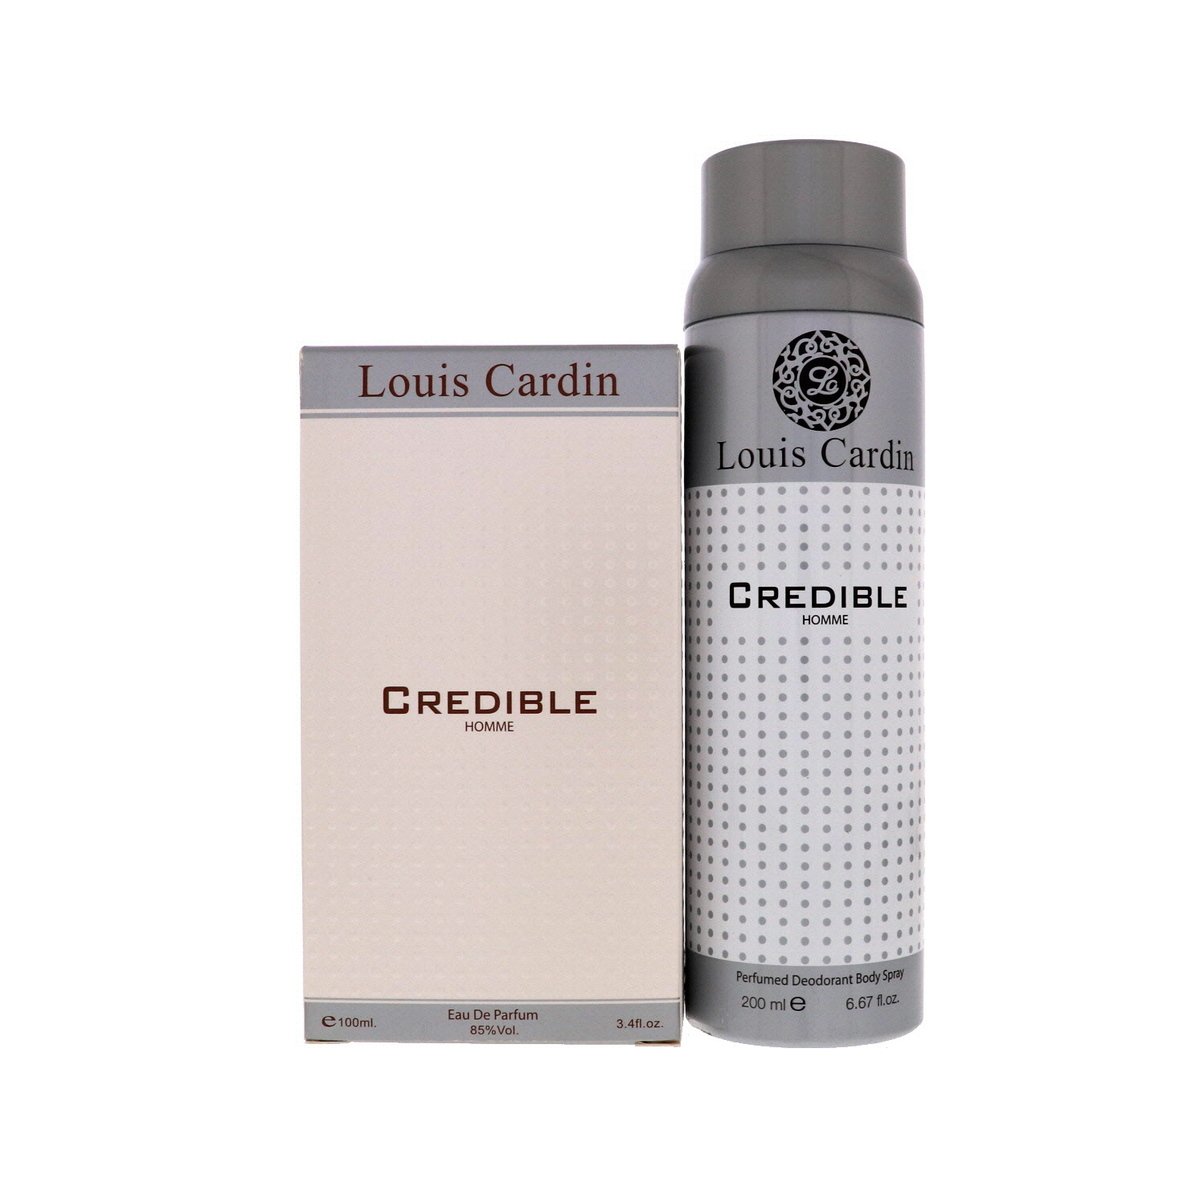 Buy Louis Cardin Products Online in Dubai at Best Prices on